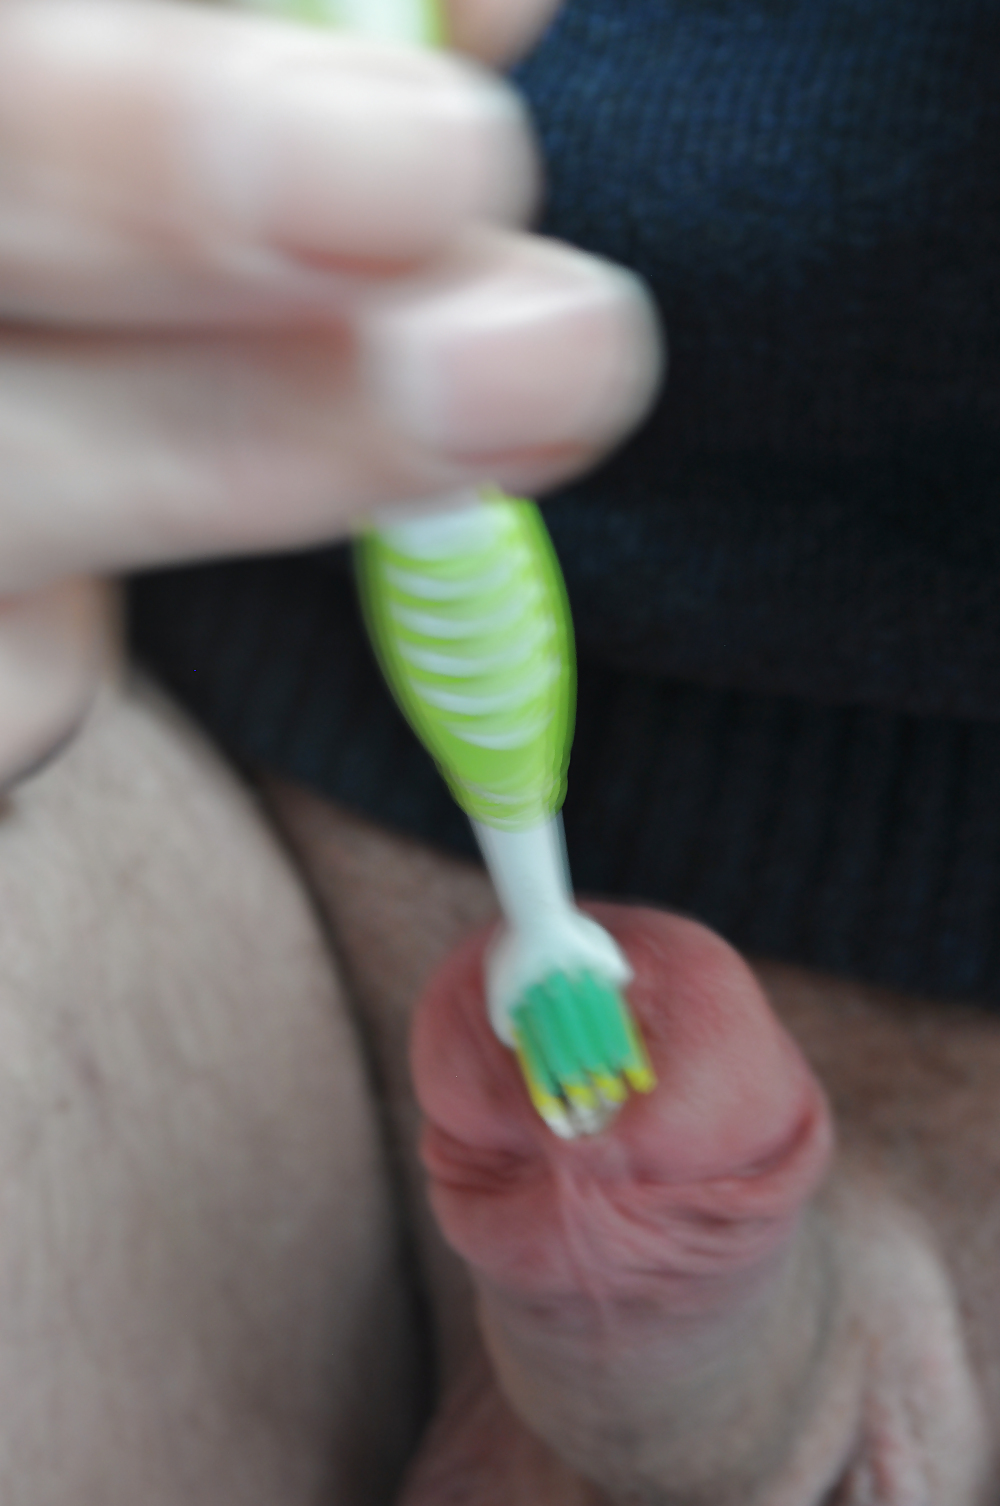 Urethra play toothbrush head and cock rings #13478053